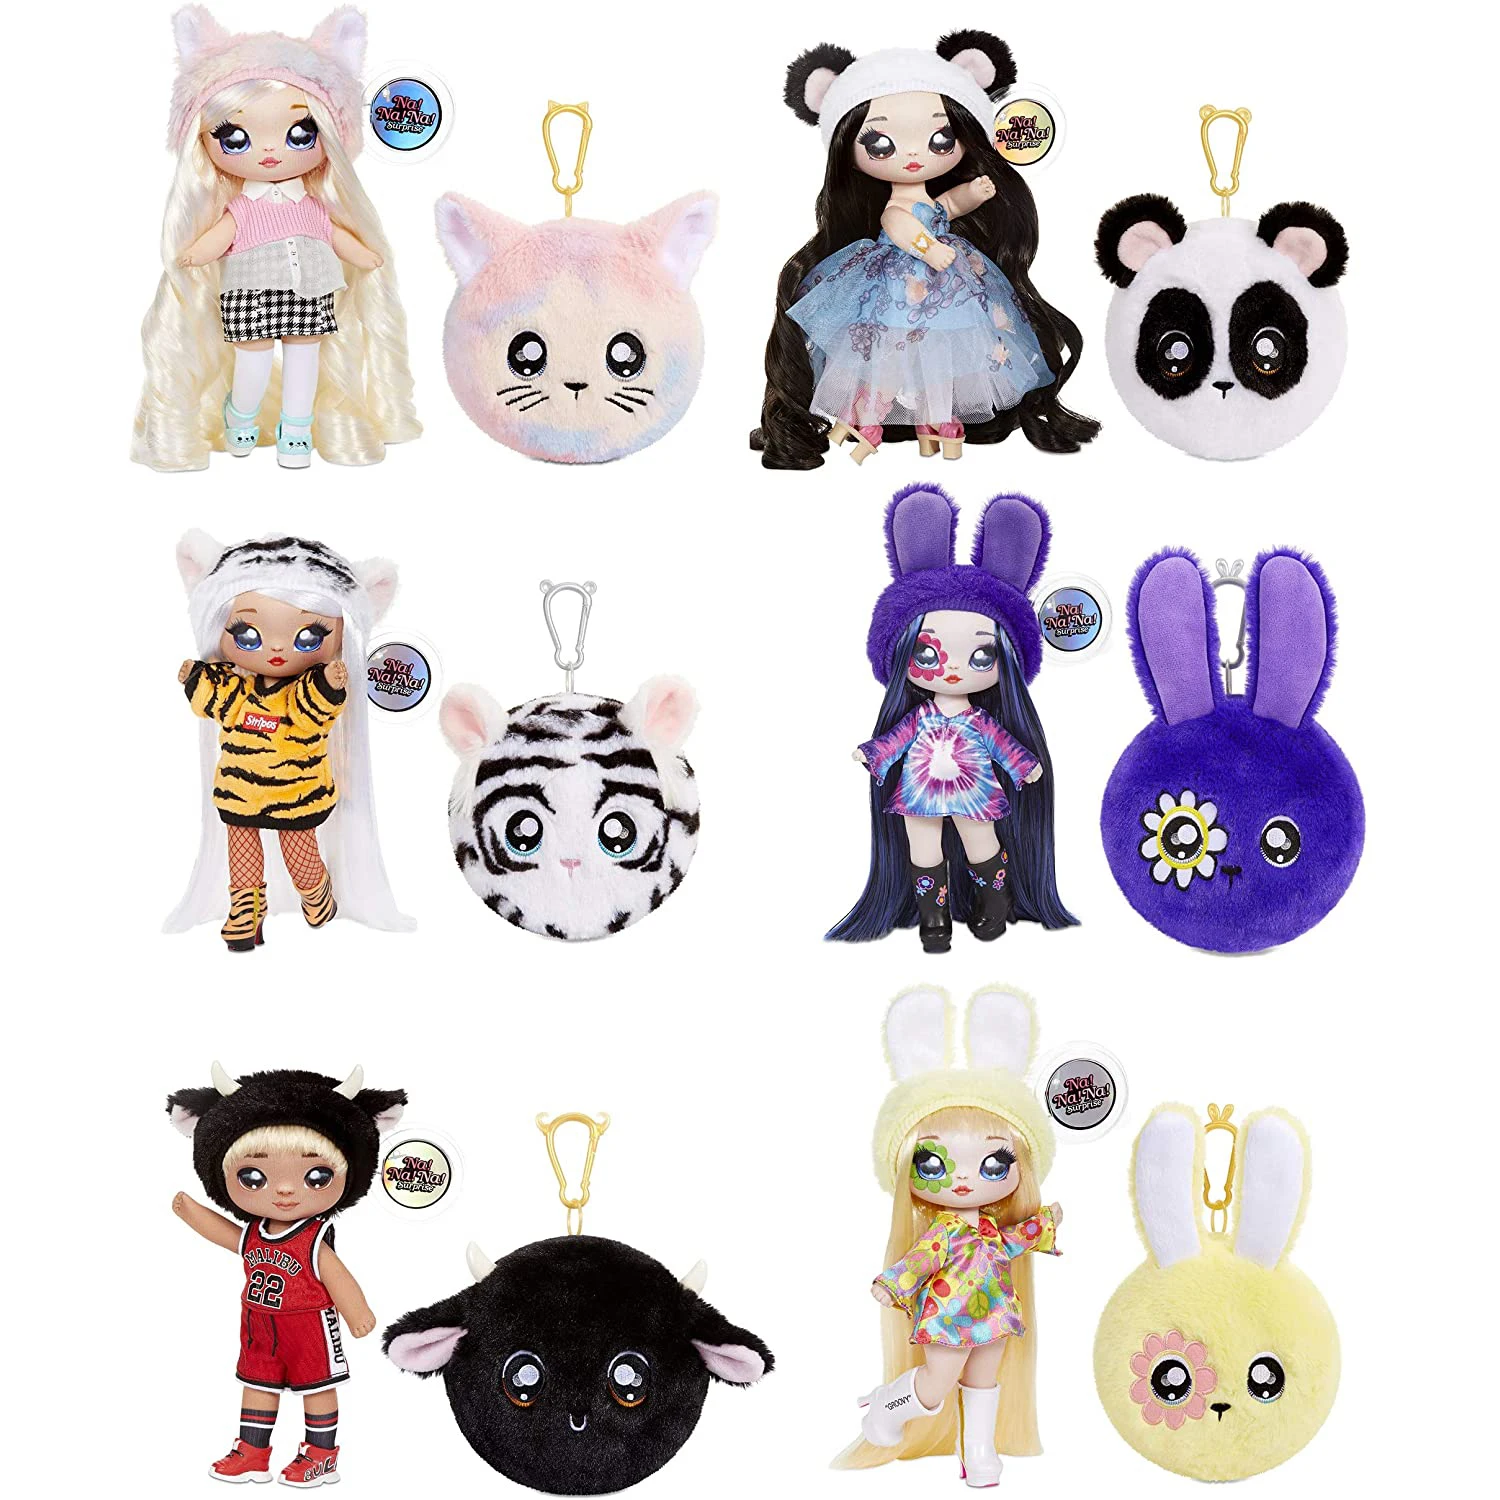 6/PCS Lol Surprise Dolls MGA Entertainment Na! Na! Na! Surprise 2 In 1  Fashion Doll Plush Toys Cute Purse Series Suit Kids Toys|Dolls| - AliExpress